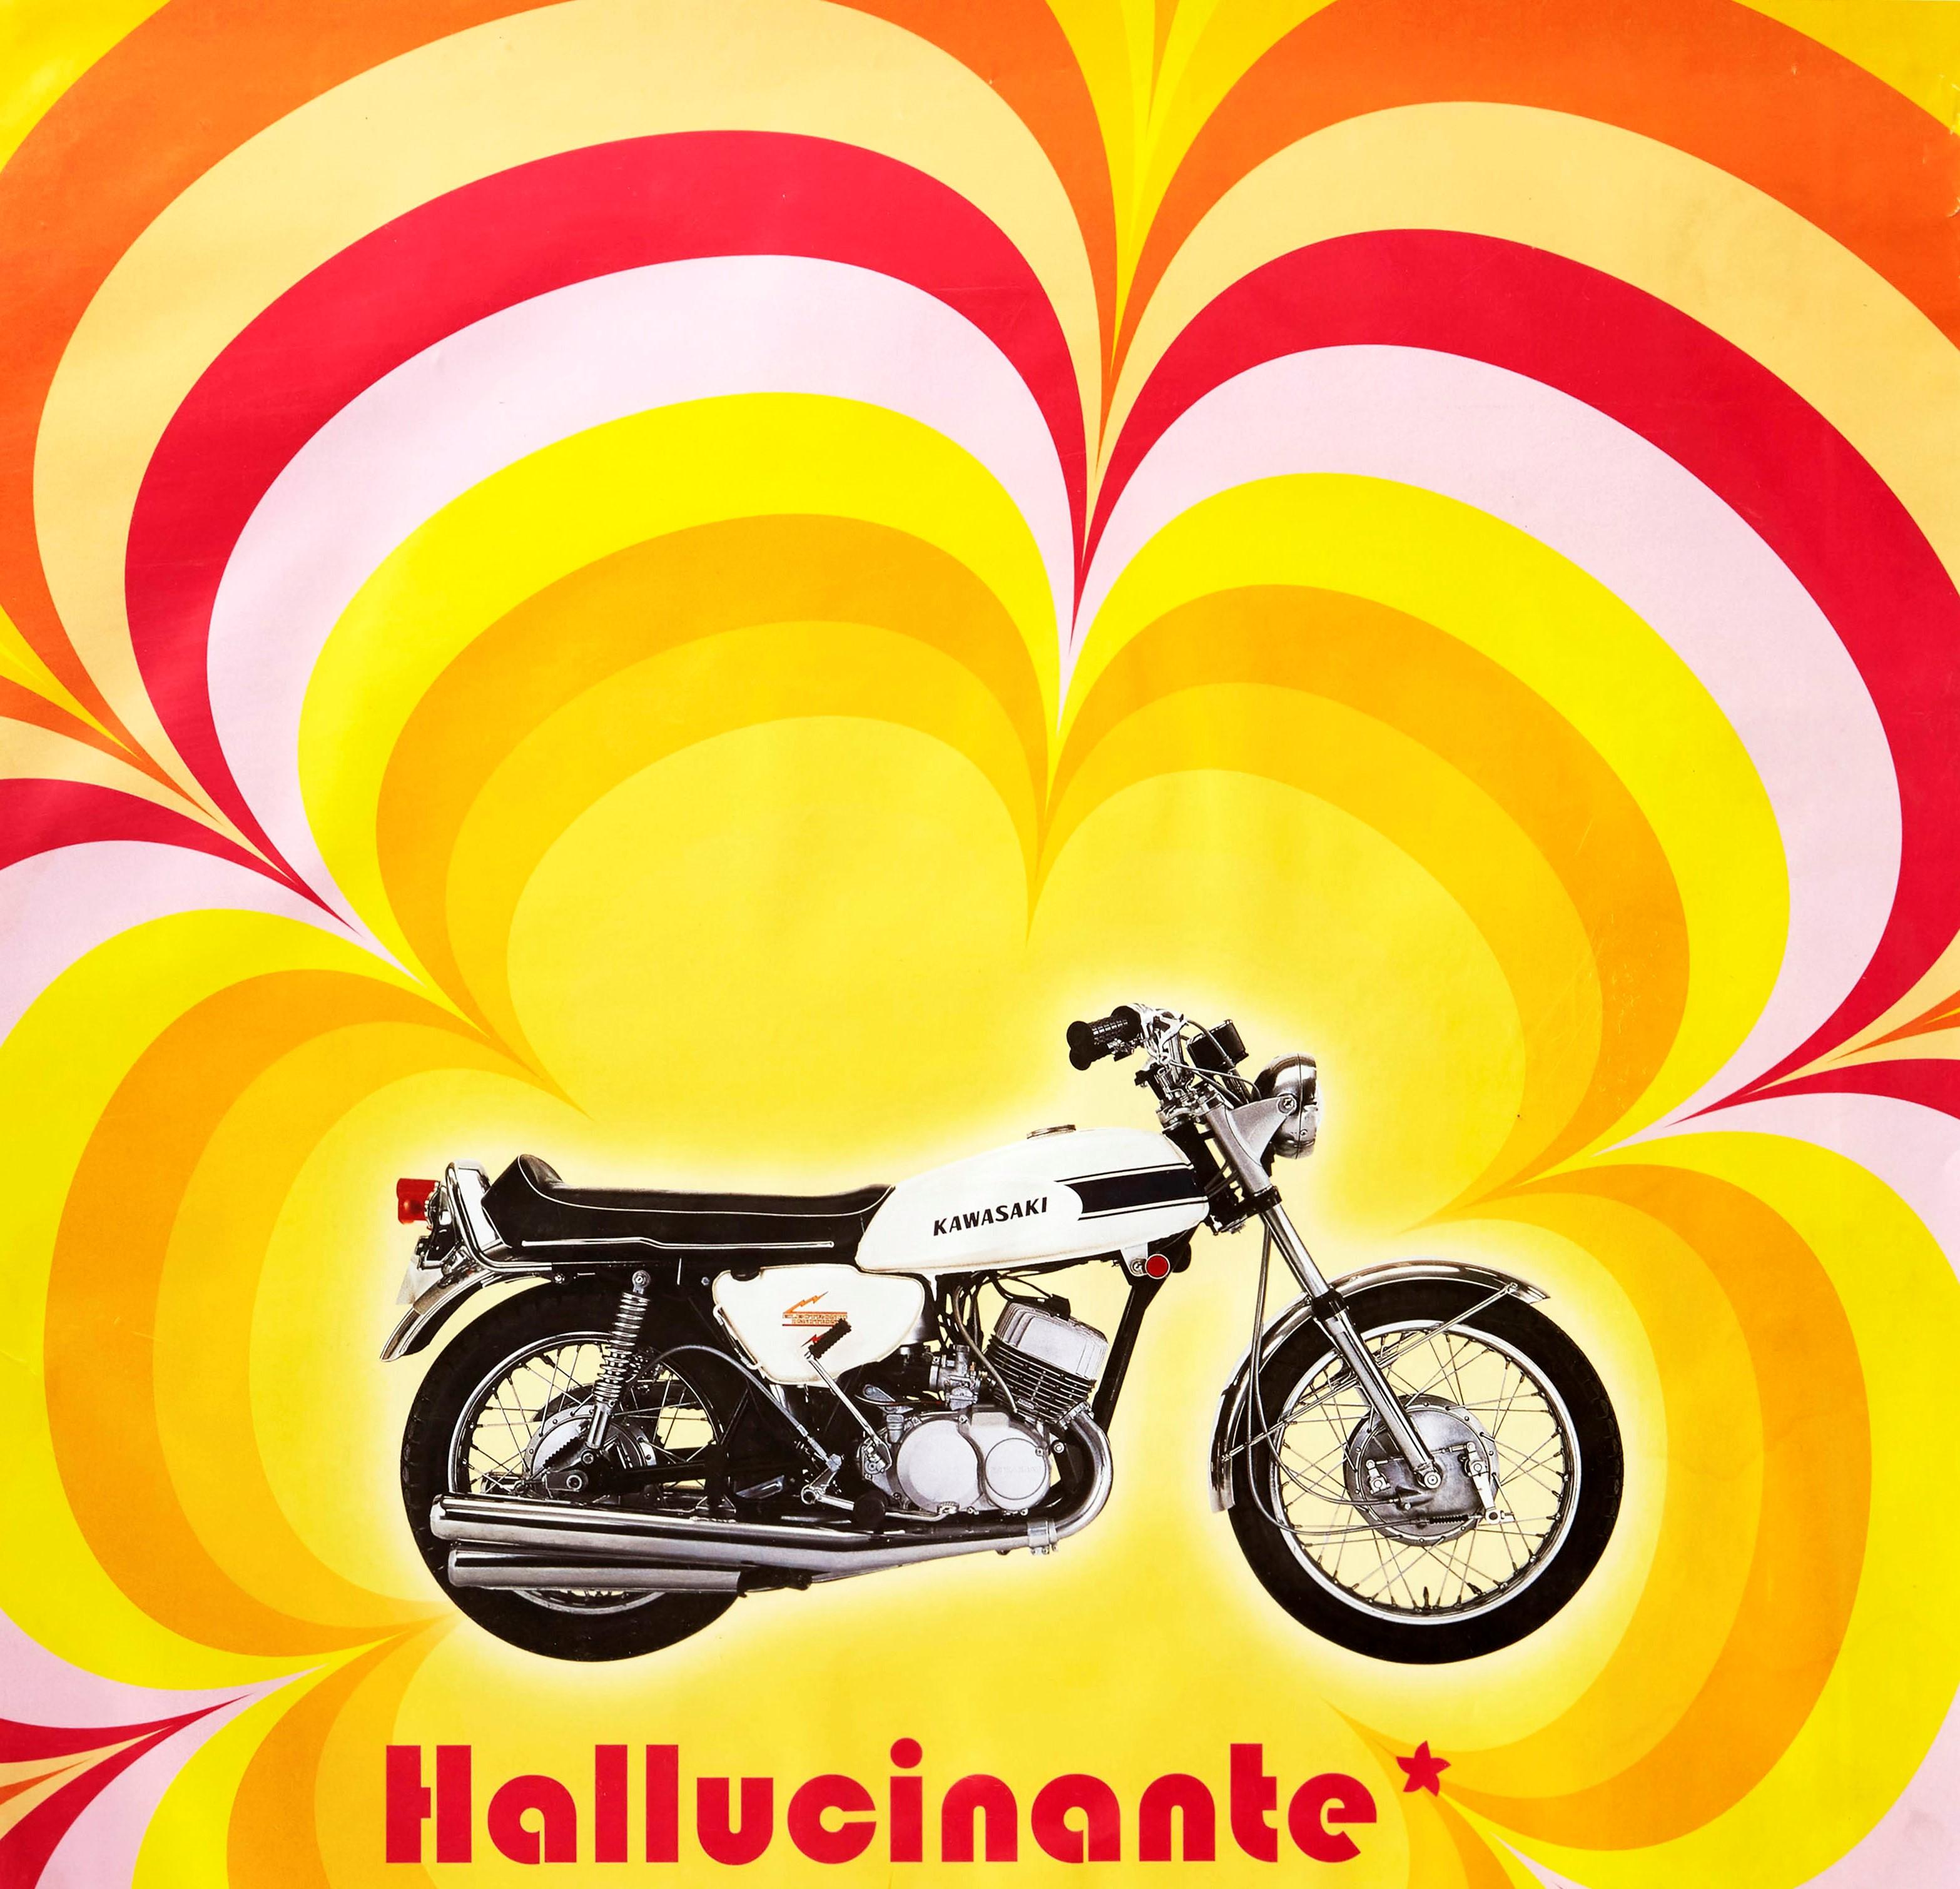 Original vintage Kawasaki motorcycle advertising poster - Hallucinante / Depuis 1969 500 H1 40 ans deja - featuring a black and white Kawasaki cruiser style motorbike against a colourful retro seventies psychedelic style hallucinatory flower pattern